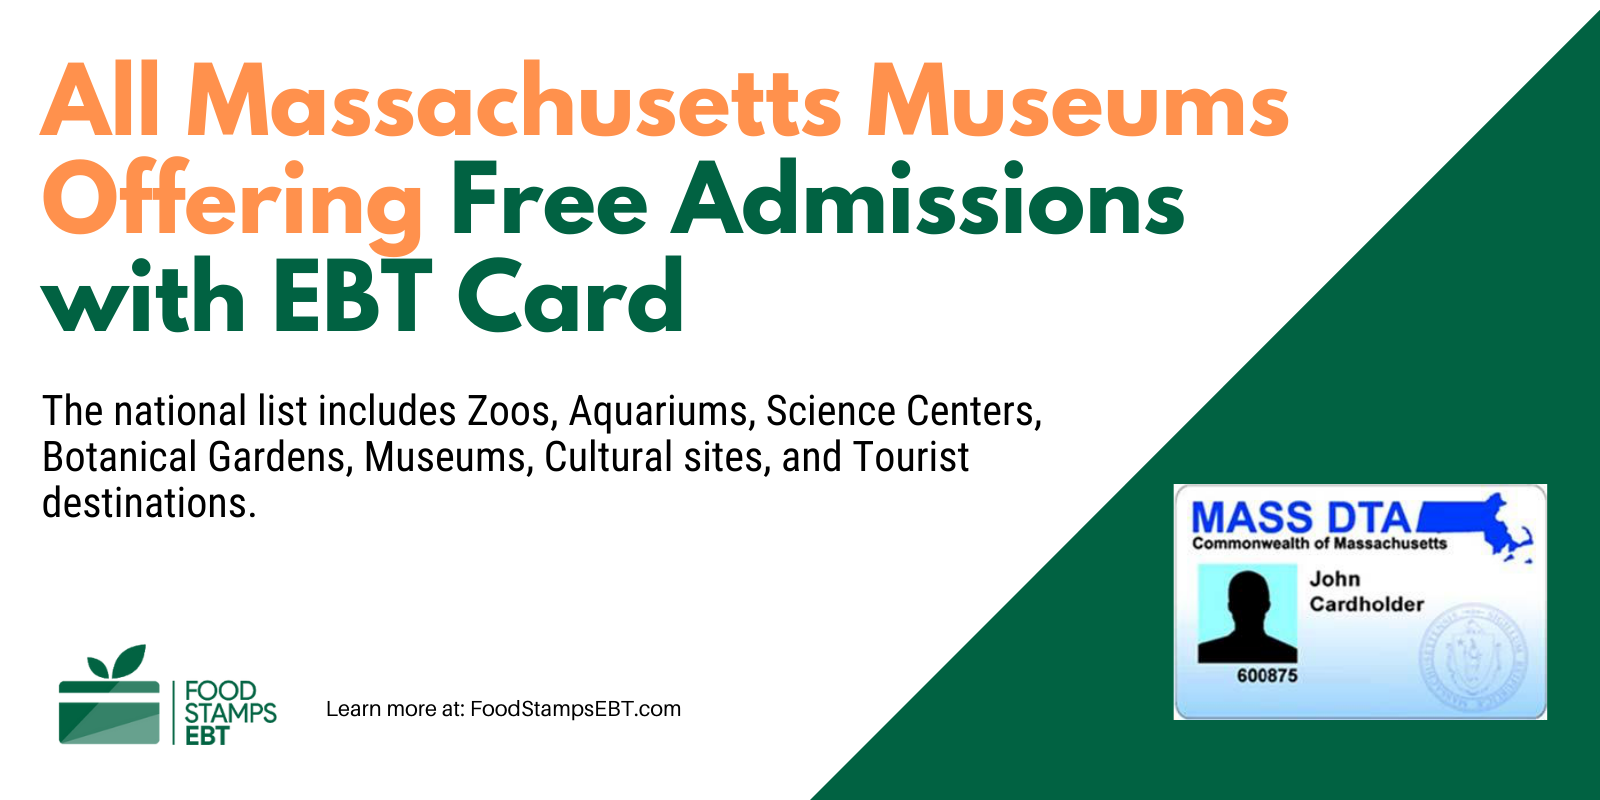 "Massachusetts Museums For Free with EBT Card"